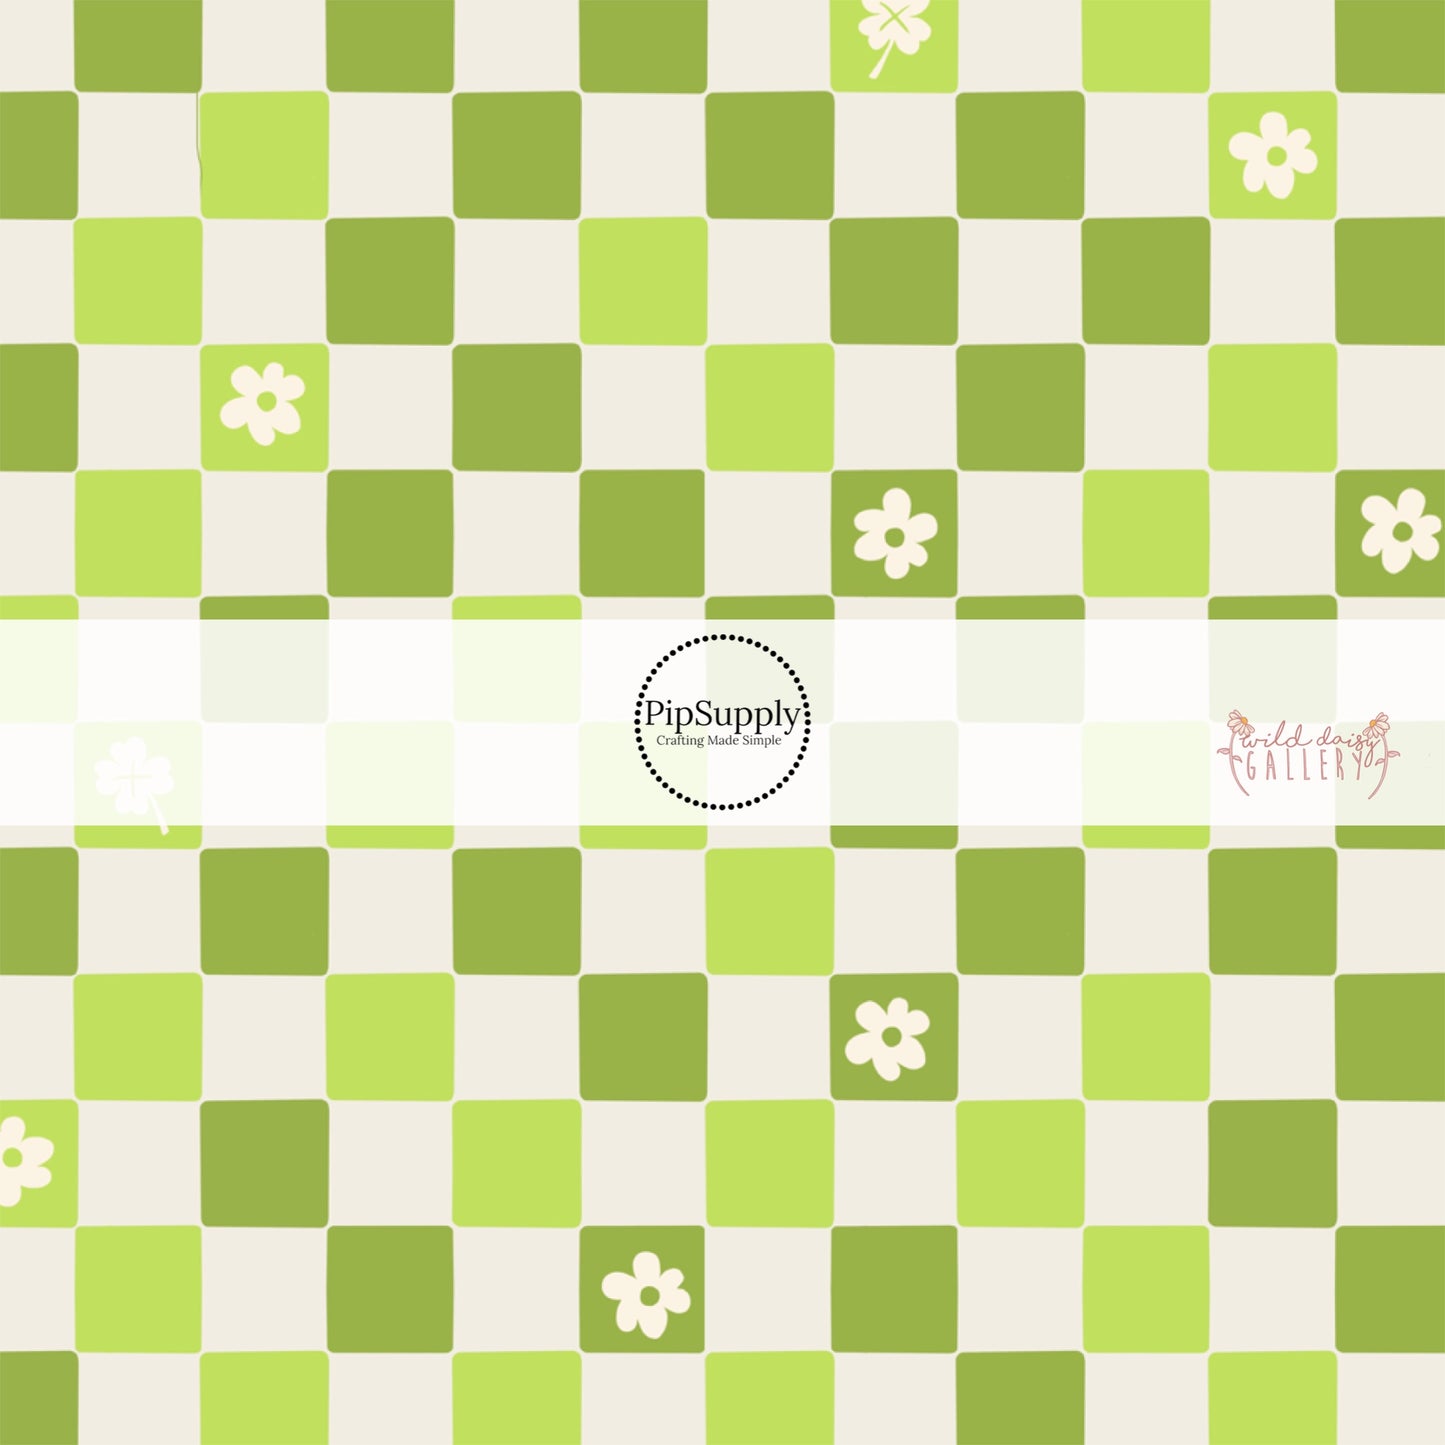 Fabric by the yard pattern with a green checkered print that has clovers and flower designs